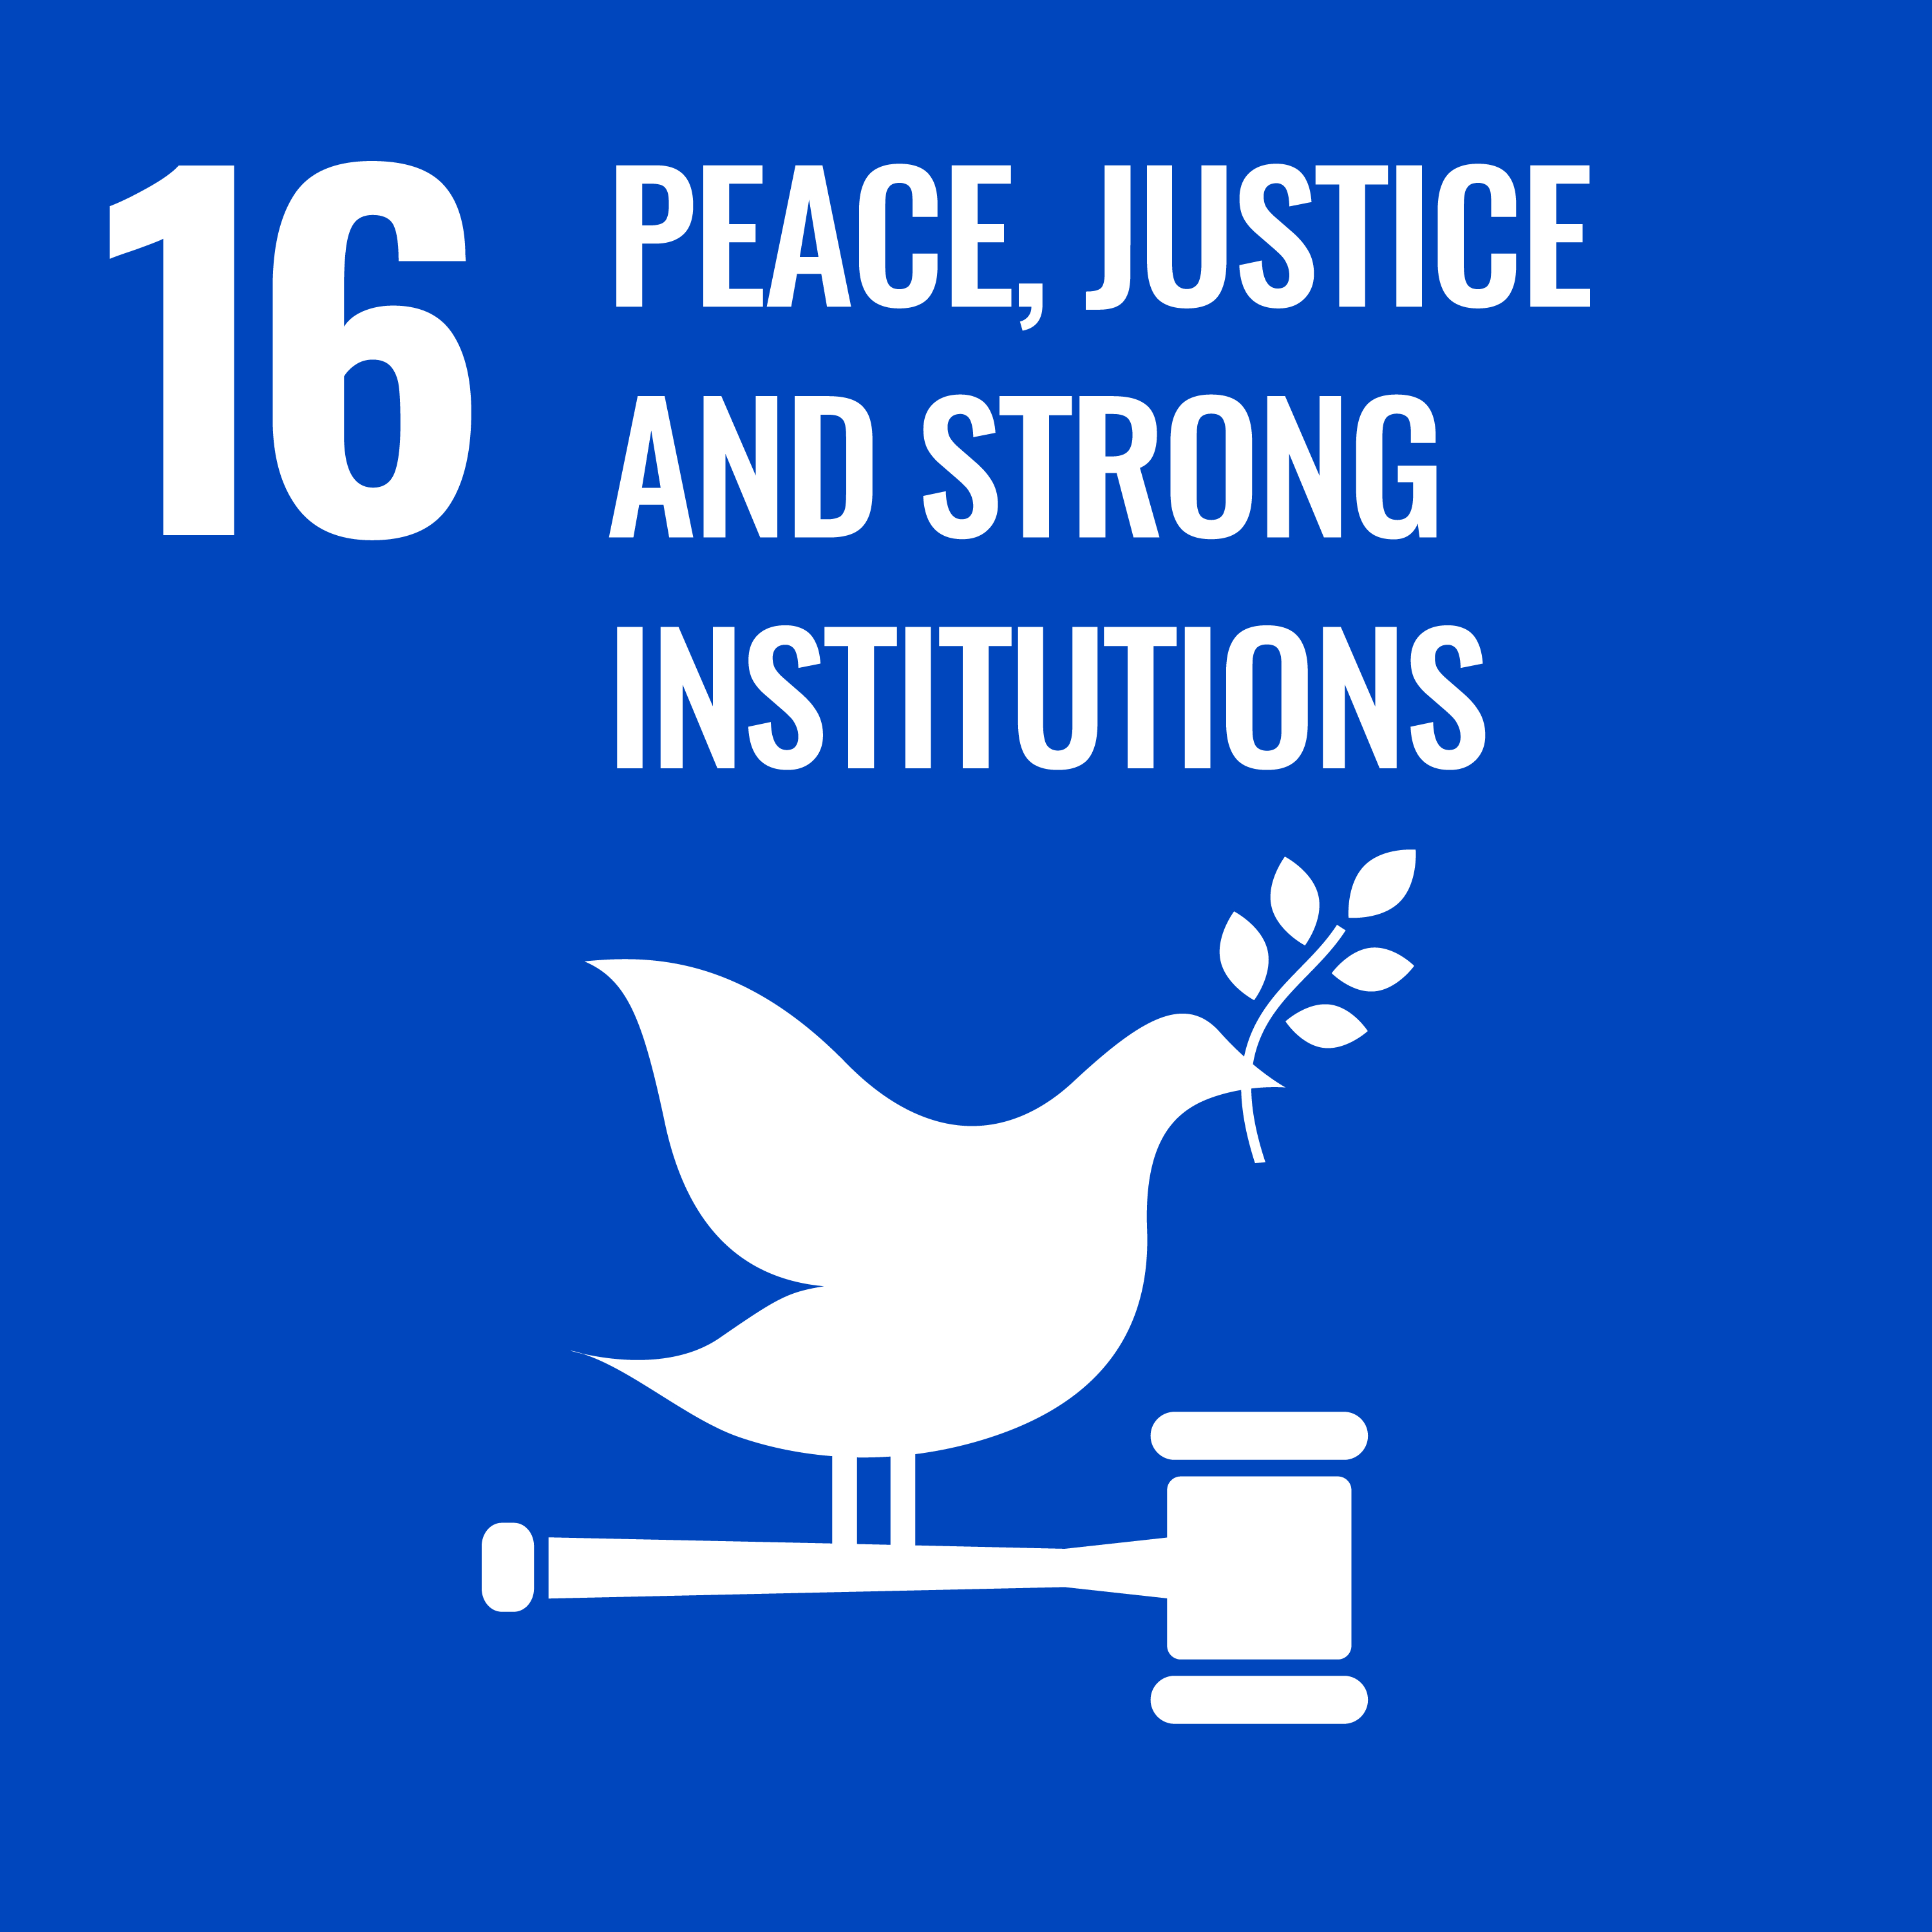 A blue icon depicting a dove on a gavel and the text "16: Peace, justice and strong institutions"